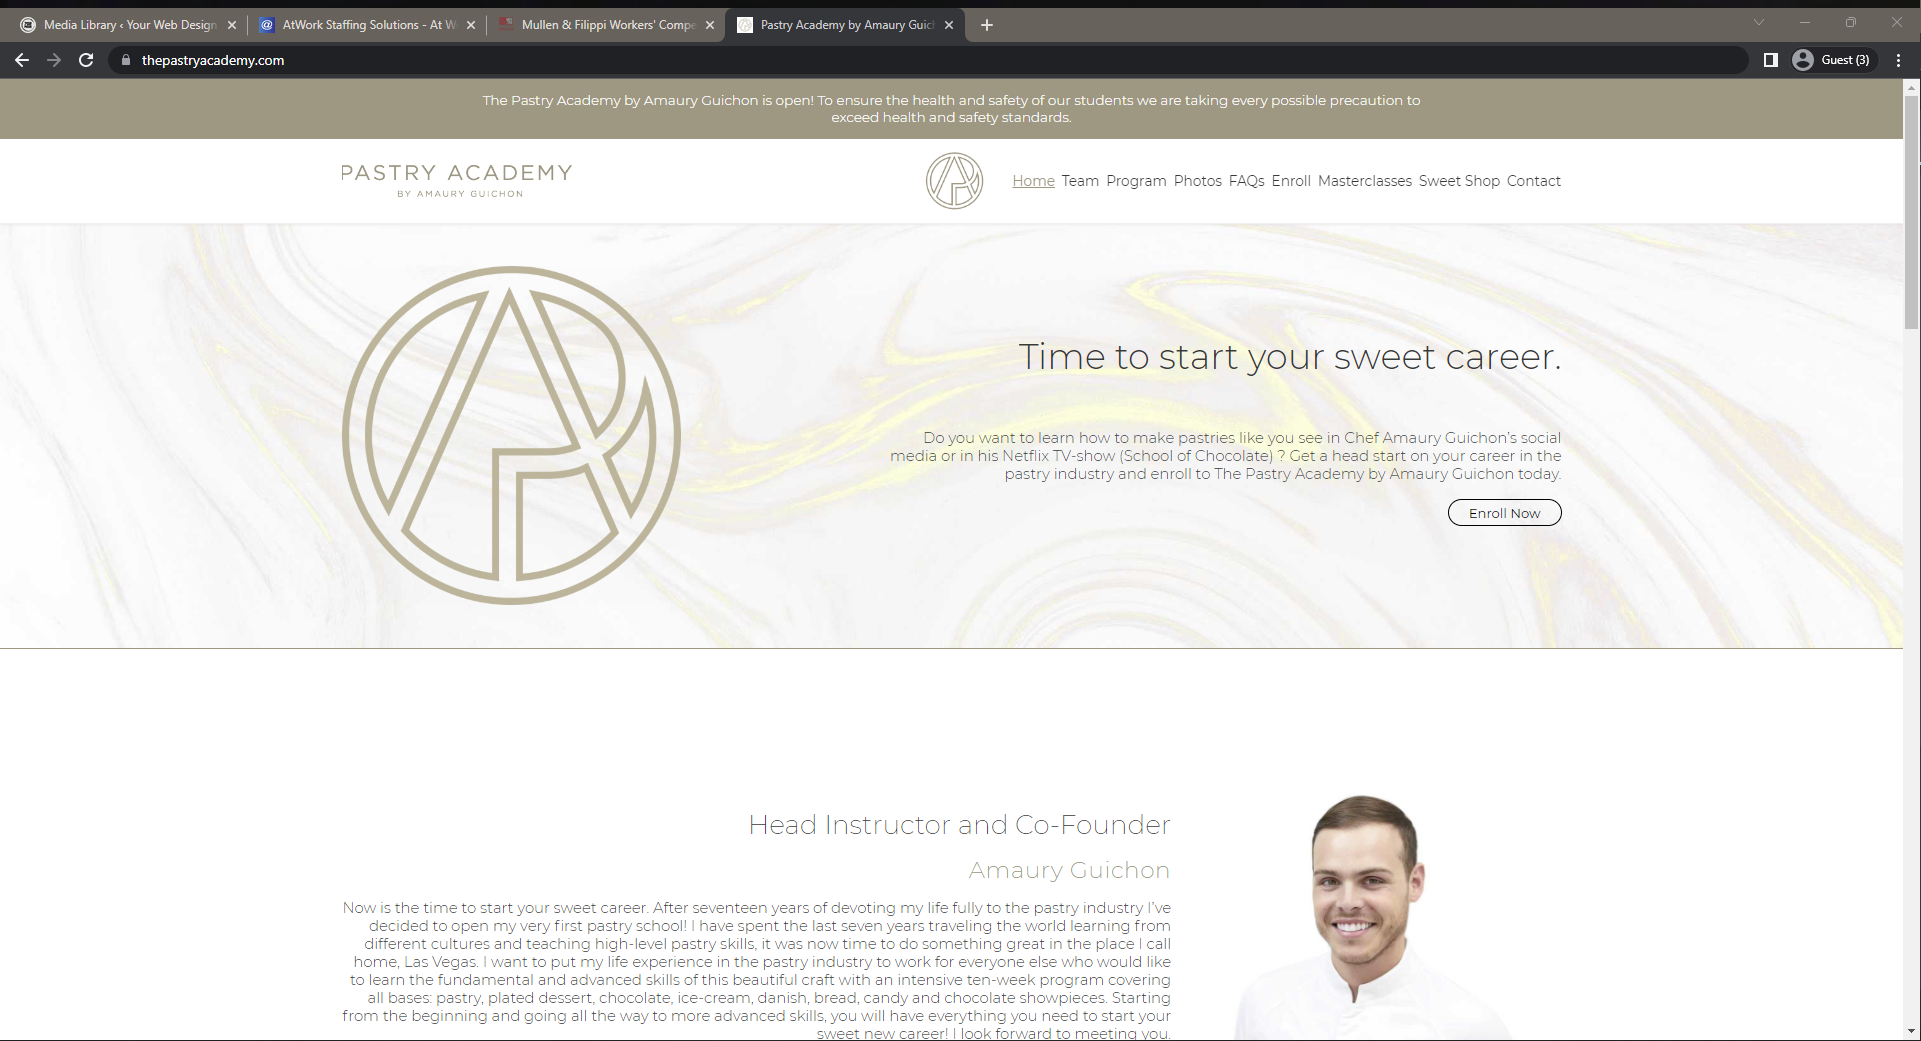 The Pastry Academy Website Design by 702 Pros - WordPress Design San Francisco, CA